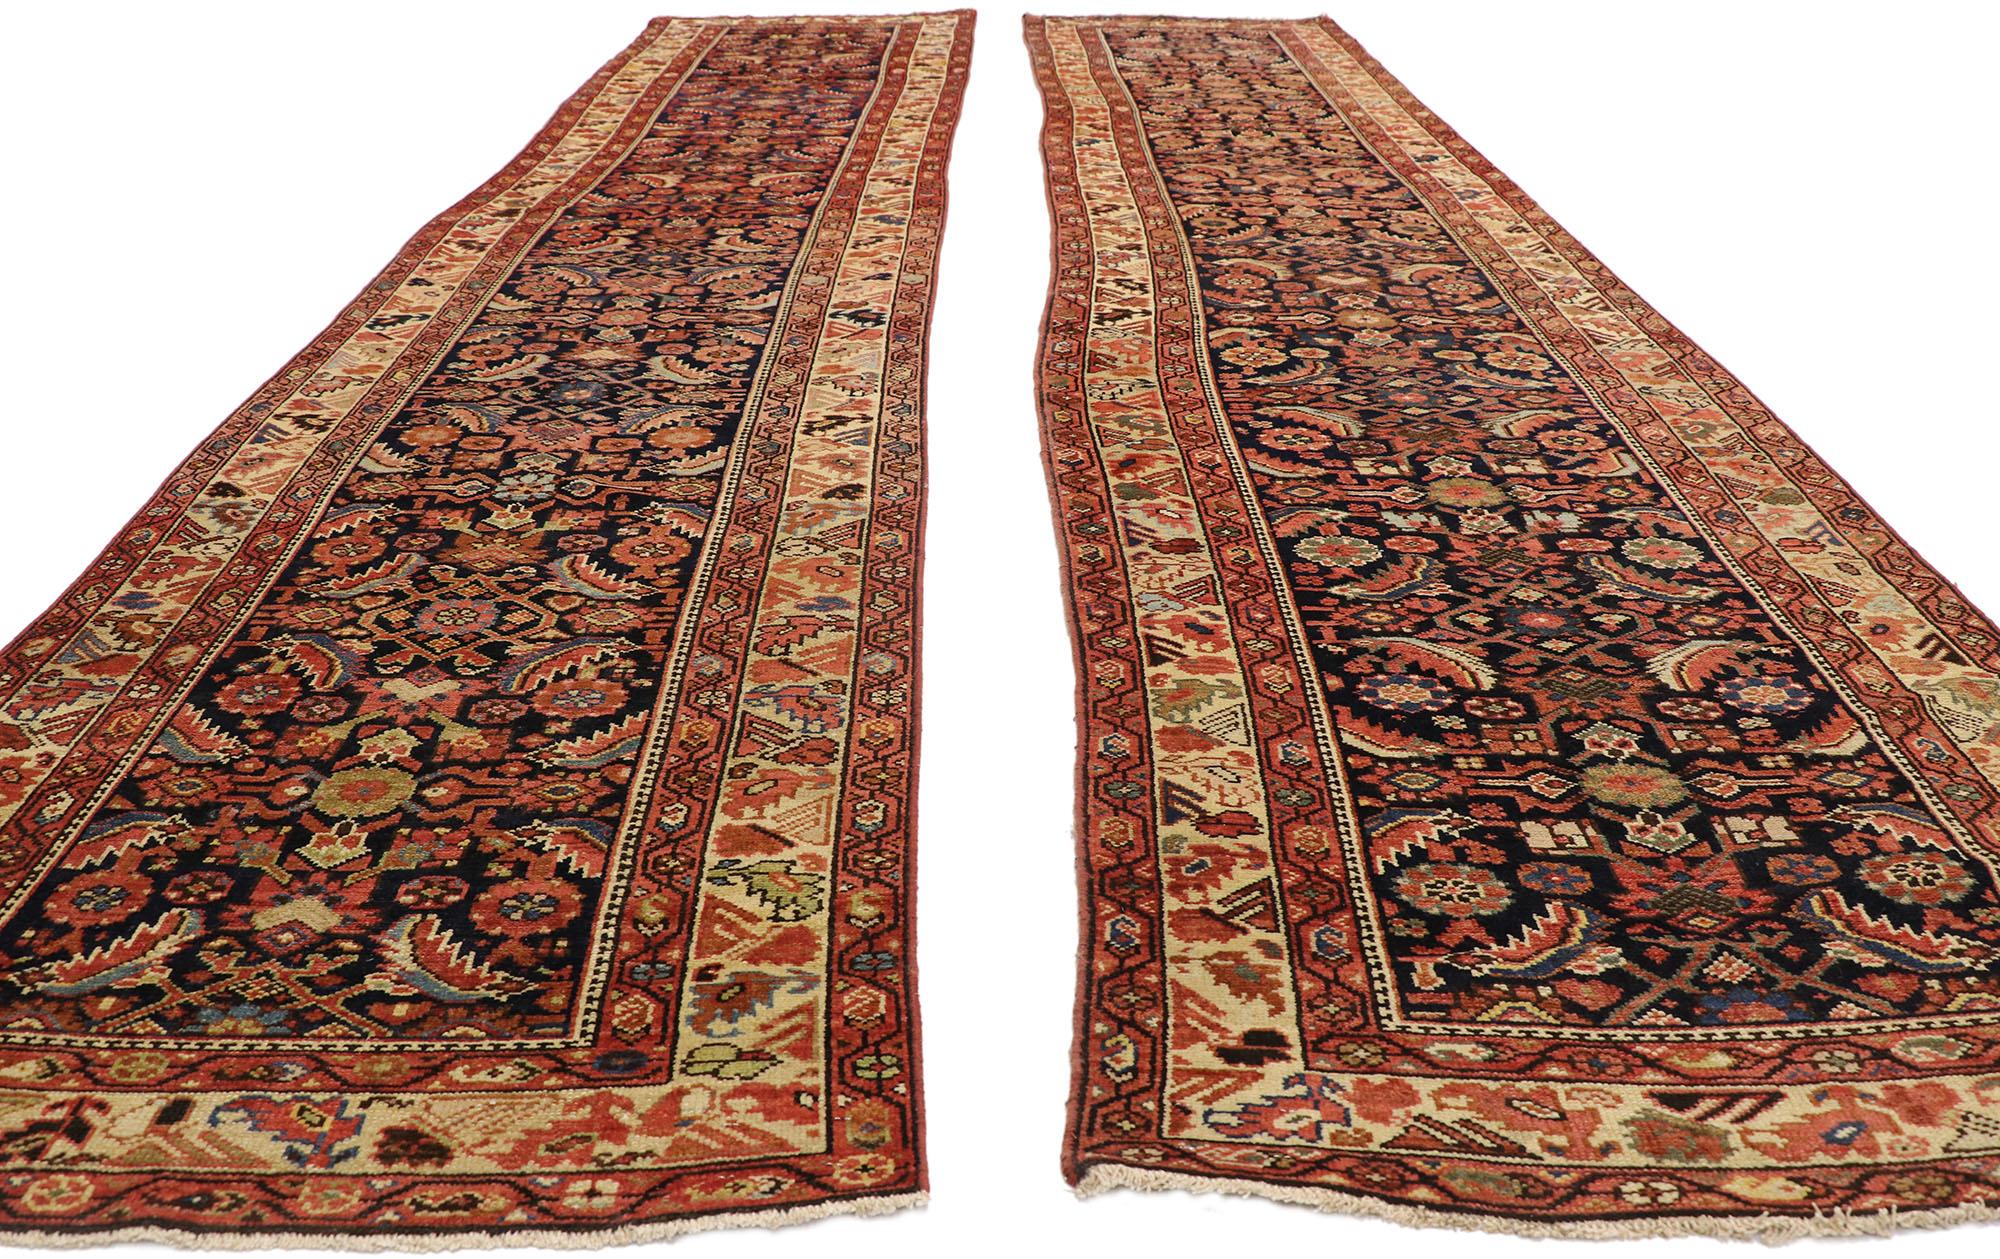 76580-76581 Pair of Antique Persian Malayer Carpet Runners, Matching Hallway Runners. Full of character and stately presence, these pair of antique Persian Malayer carpet runners showcase an intrinsic geometric pattern highlighting the infamous